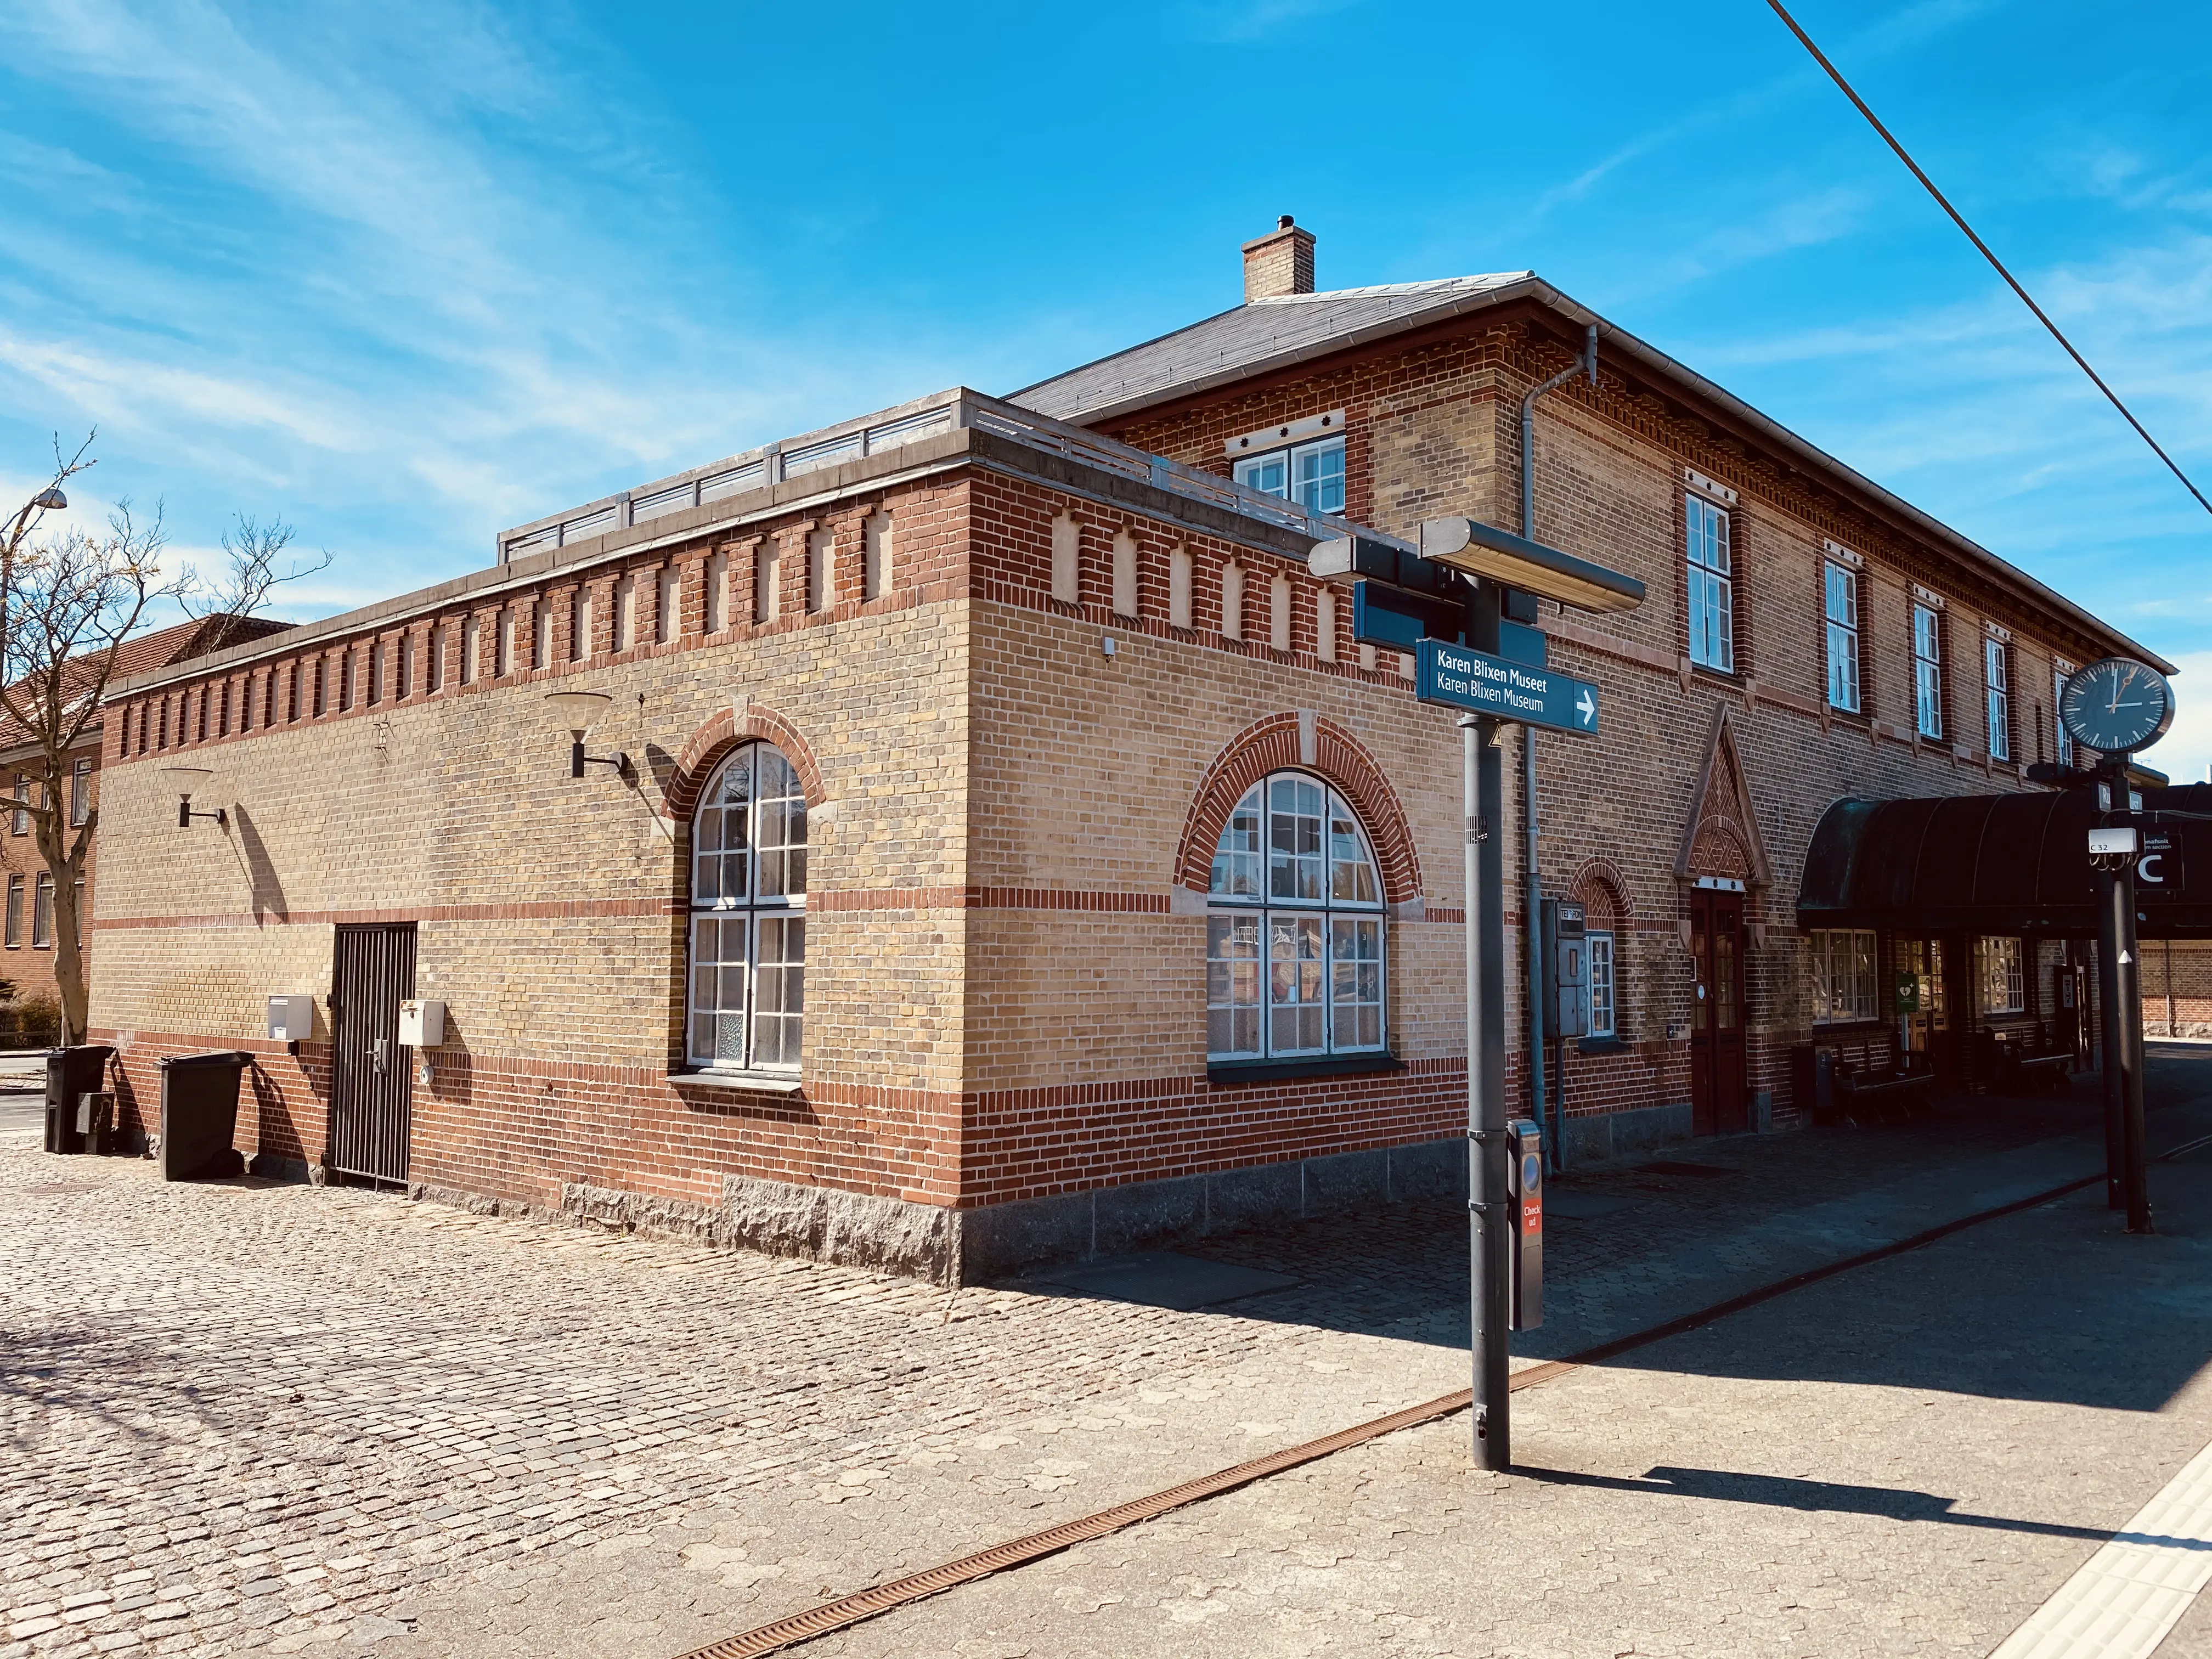 Rungsted Kyst Station.